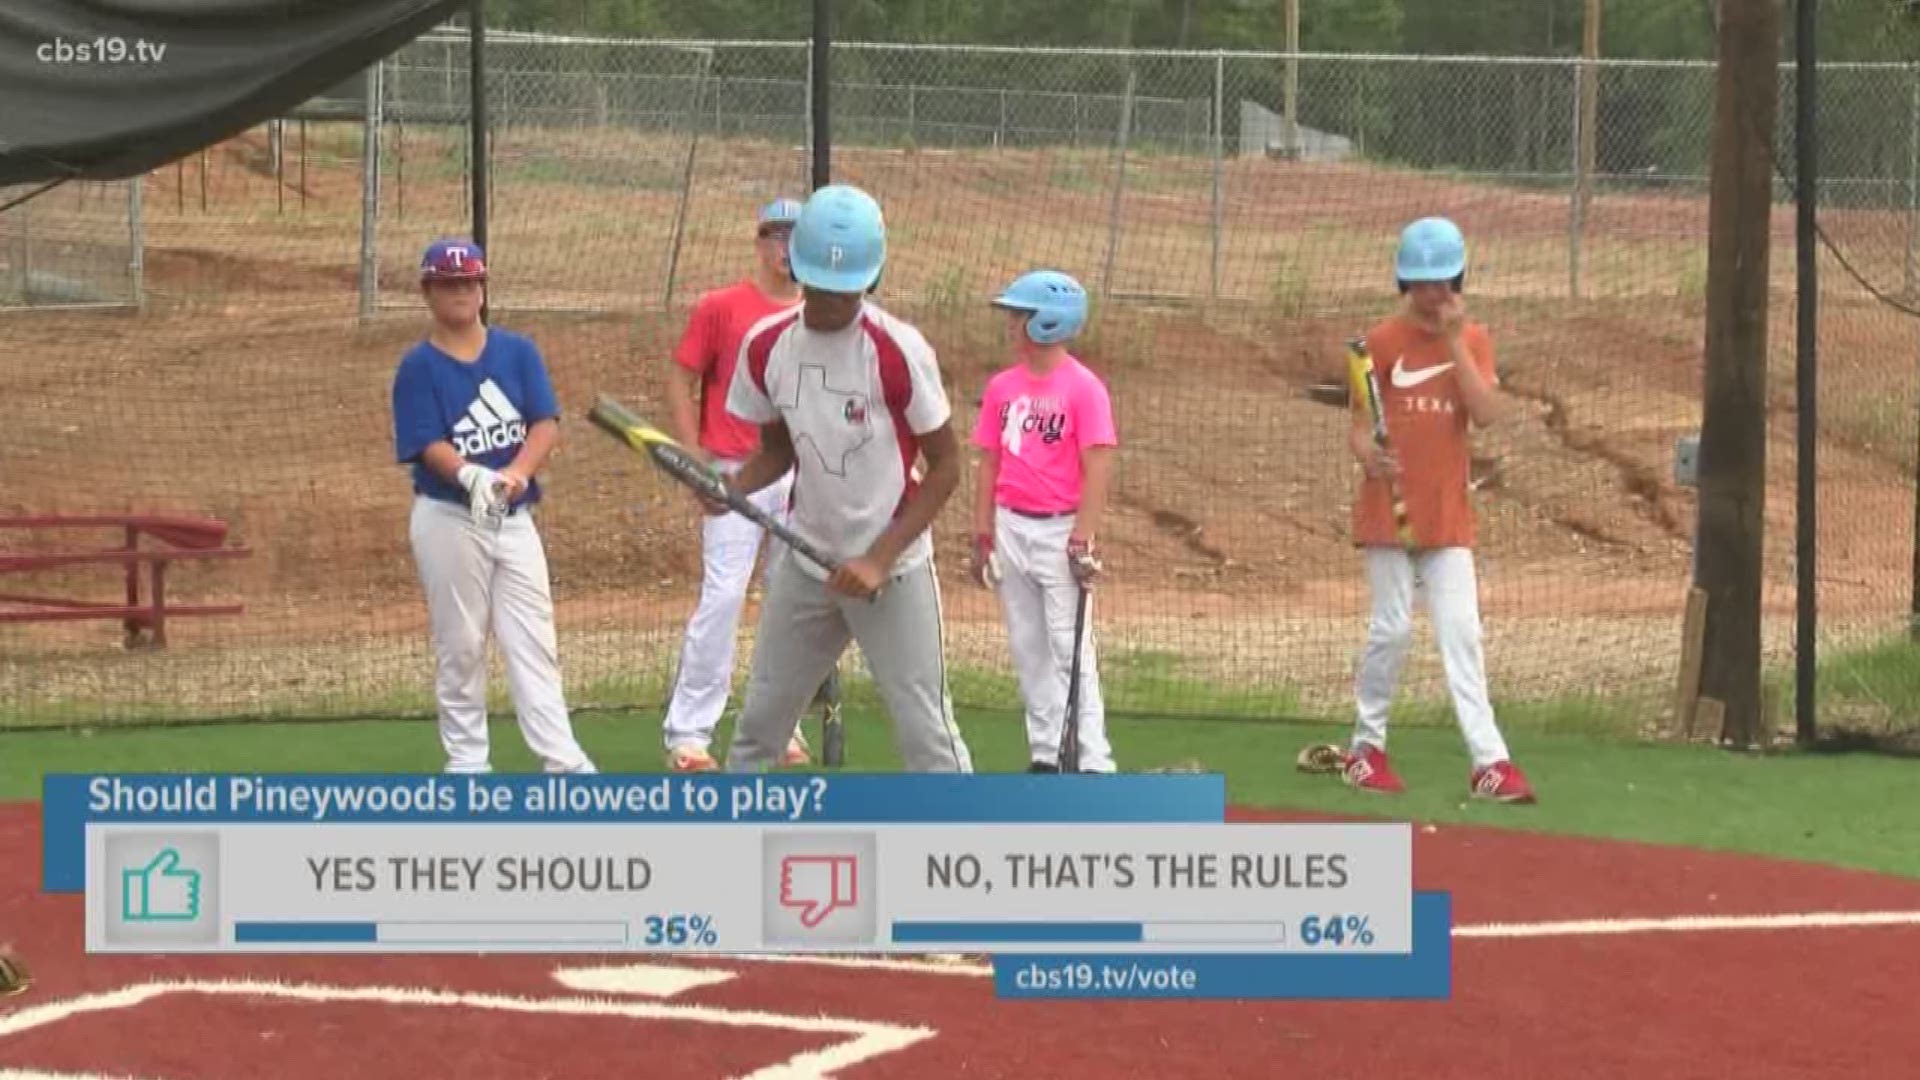 Pineywoods All Star little league team disqualified from tournament